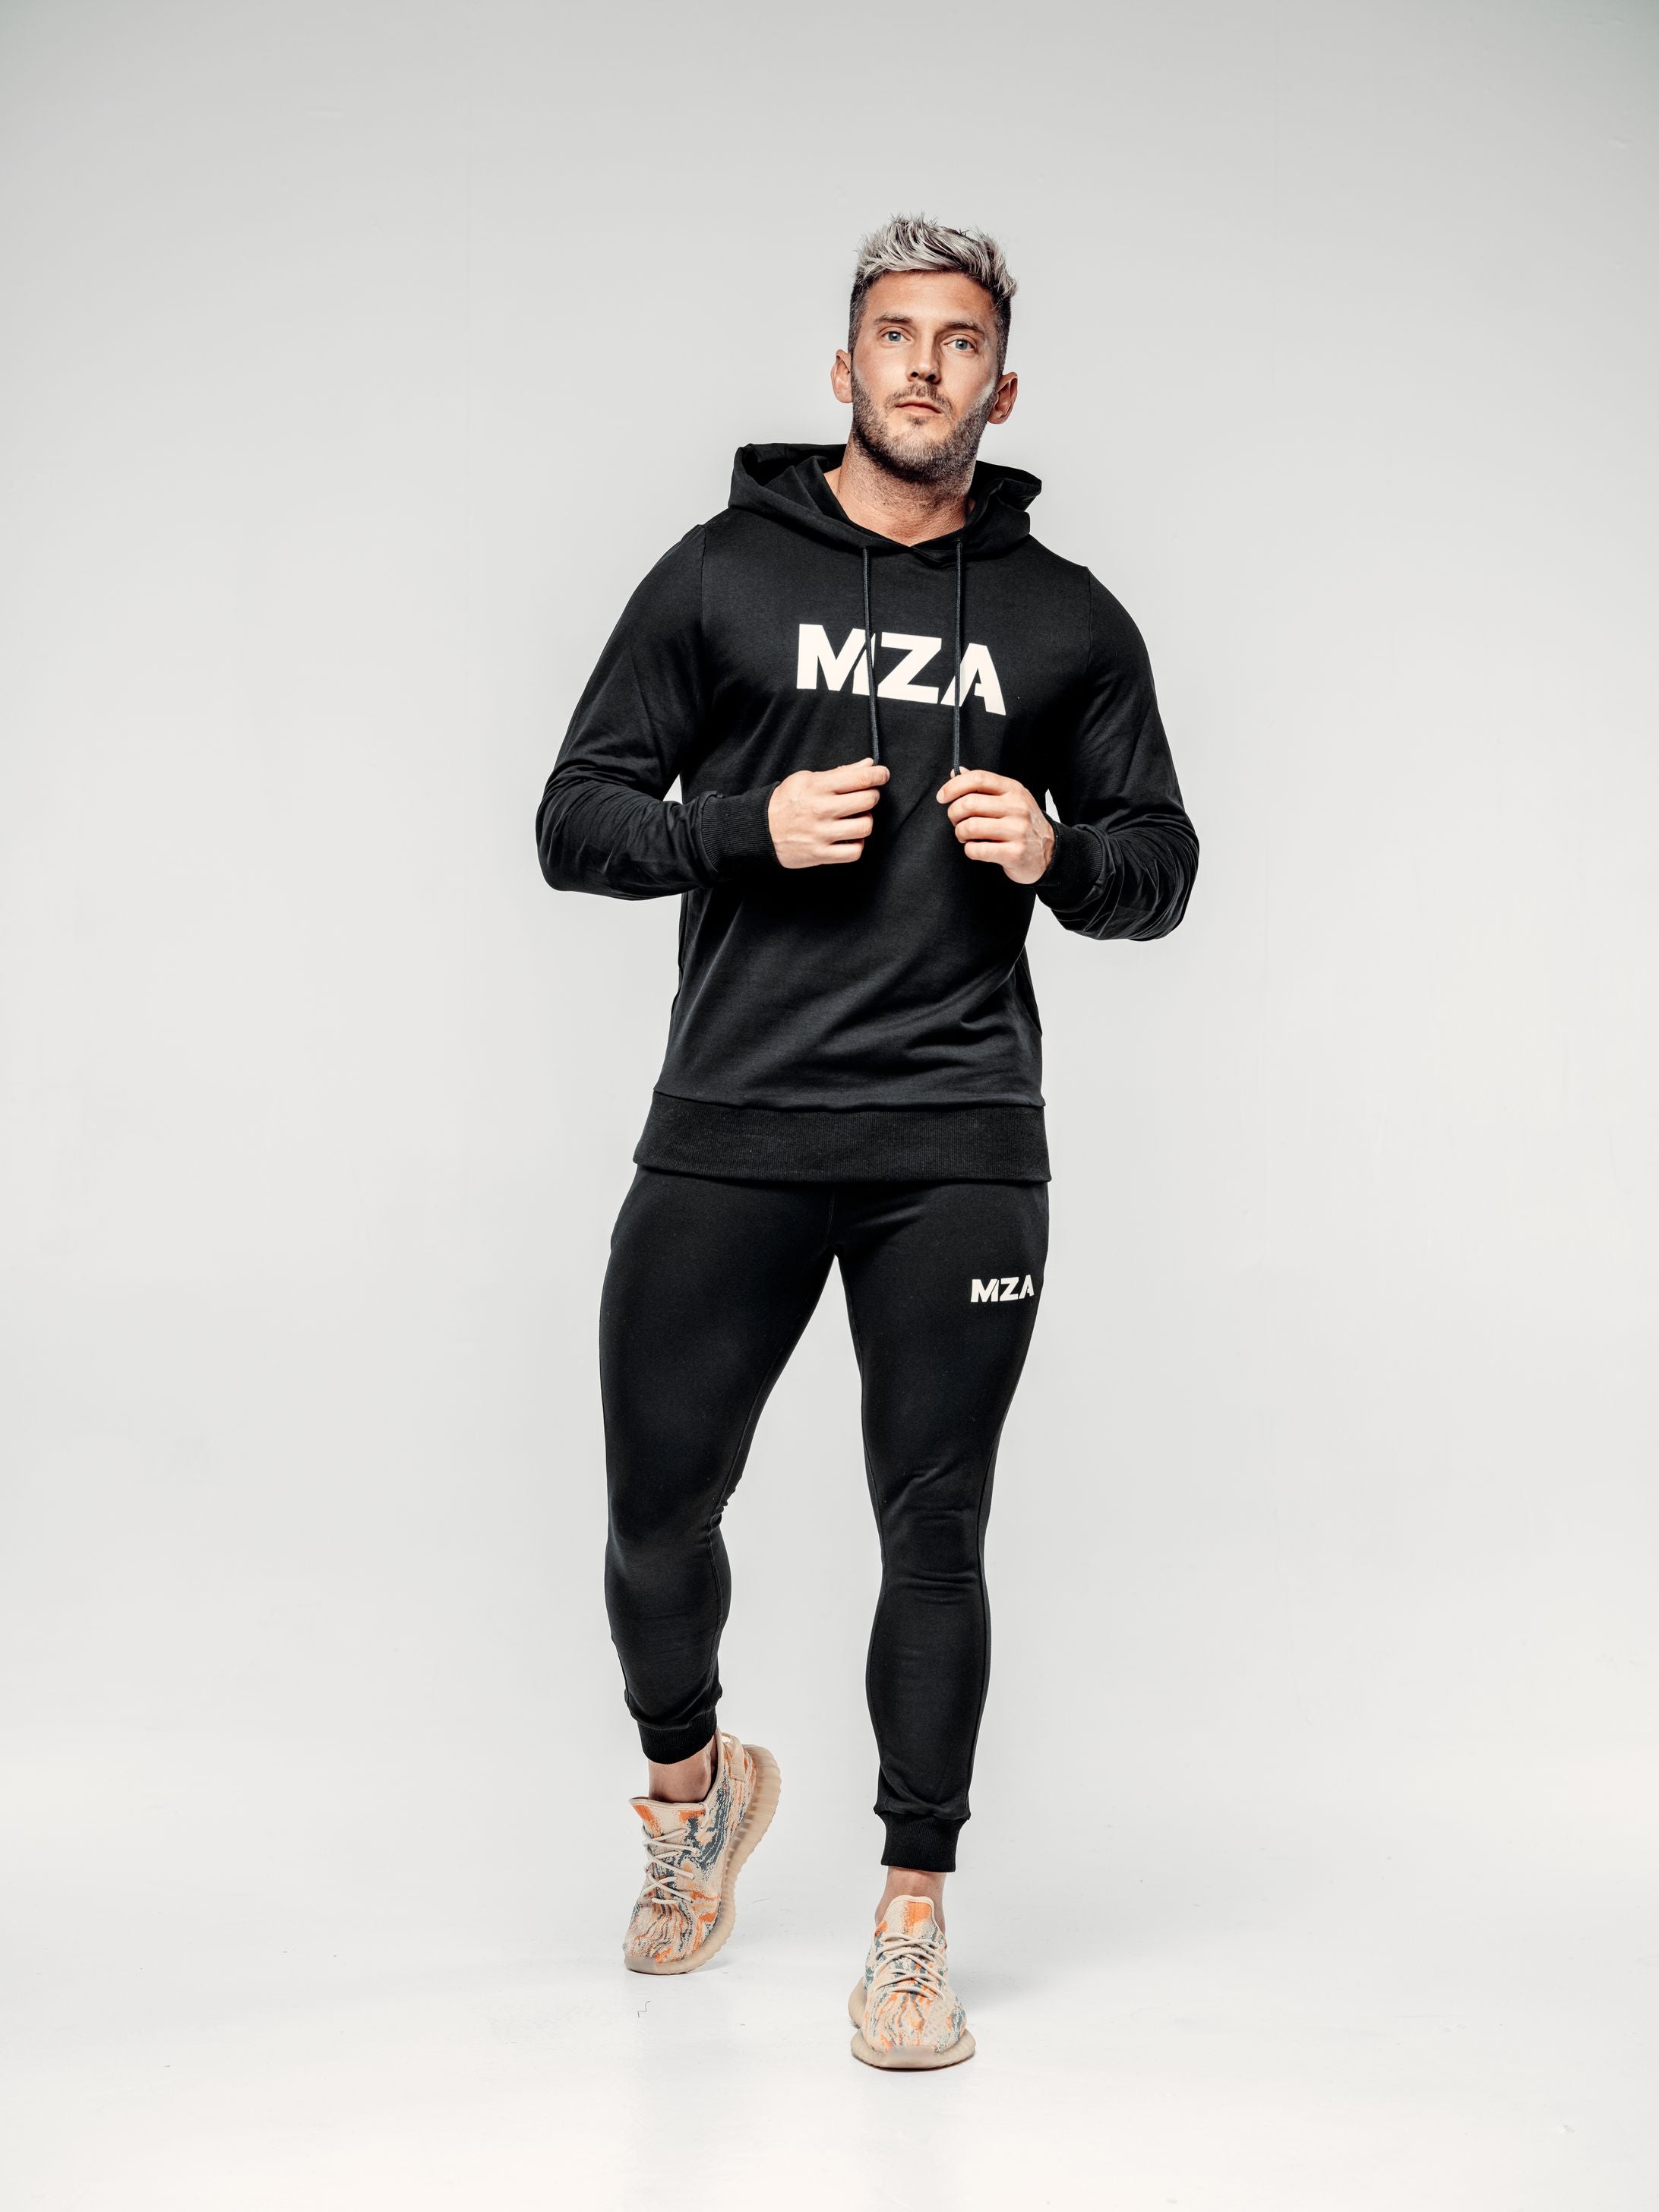 This is Shane wearing the new standard hoodie in black and the new standard joggers in black.  Matching hoodie and jogger combo.  Shane is taking a step forwards and is holding both strings of the hoodie